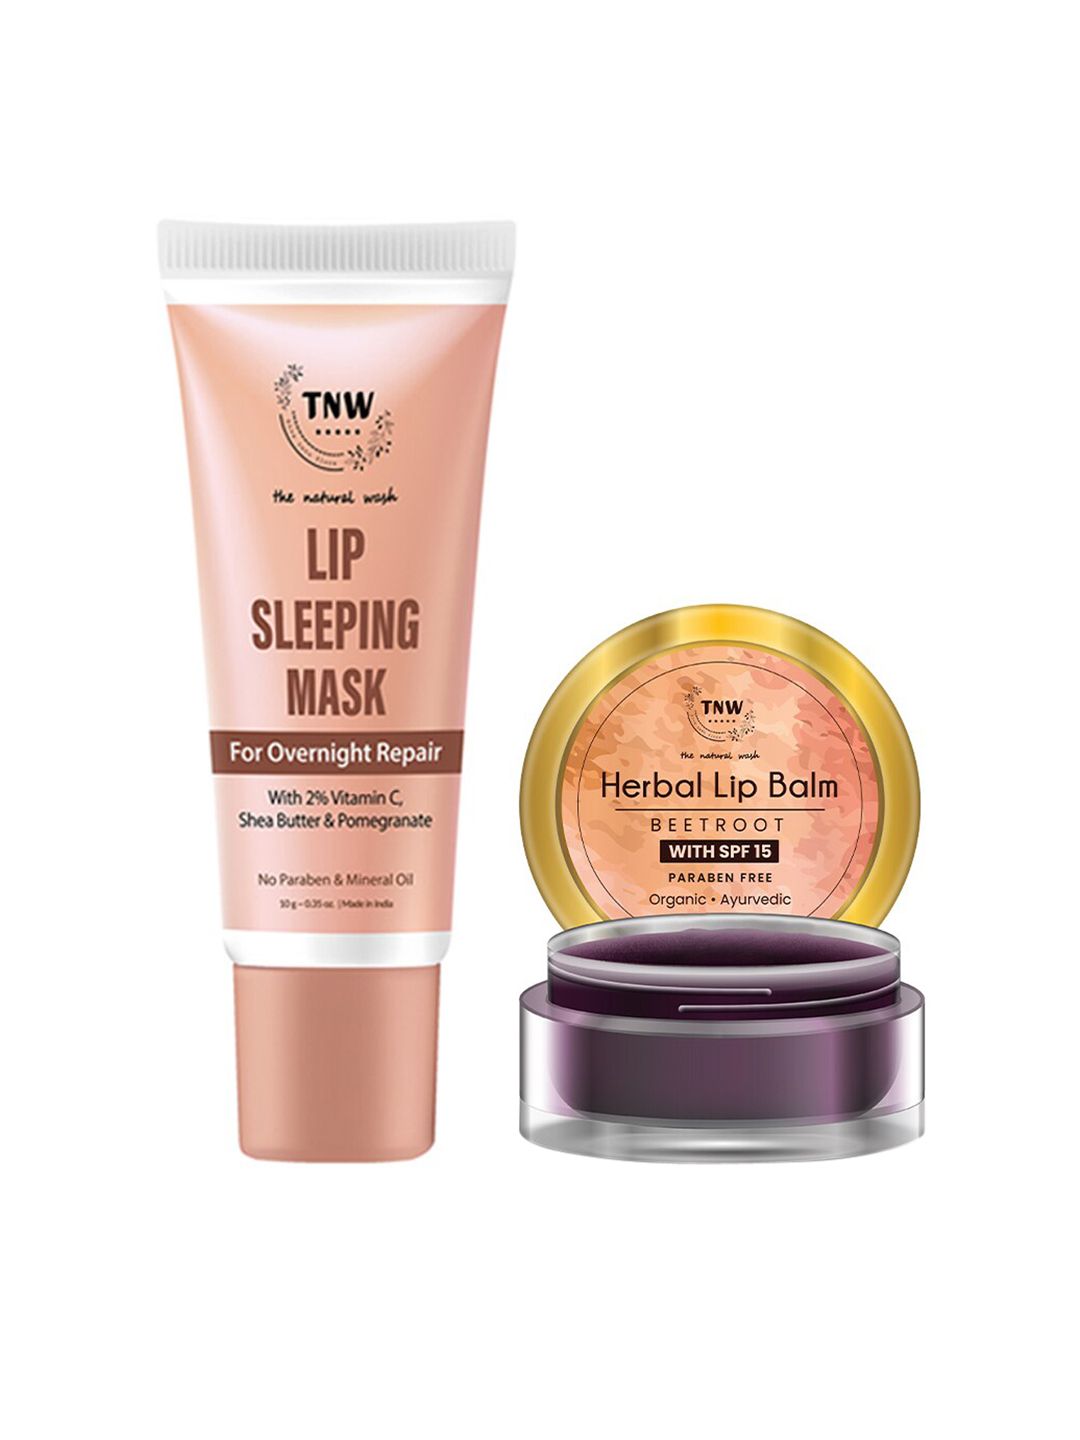 TNW the natural wash Set of Beetroot Lip Balm & Lip Sleeping Mask Price in India